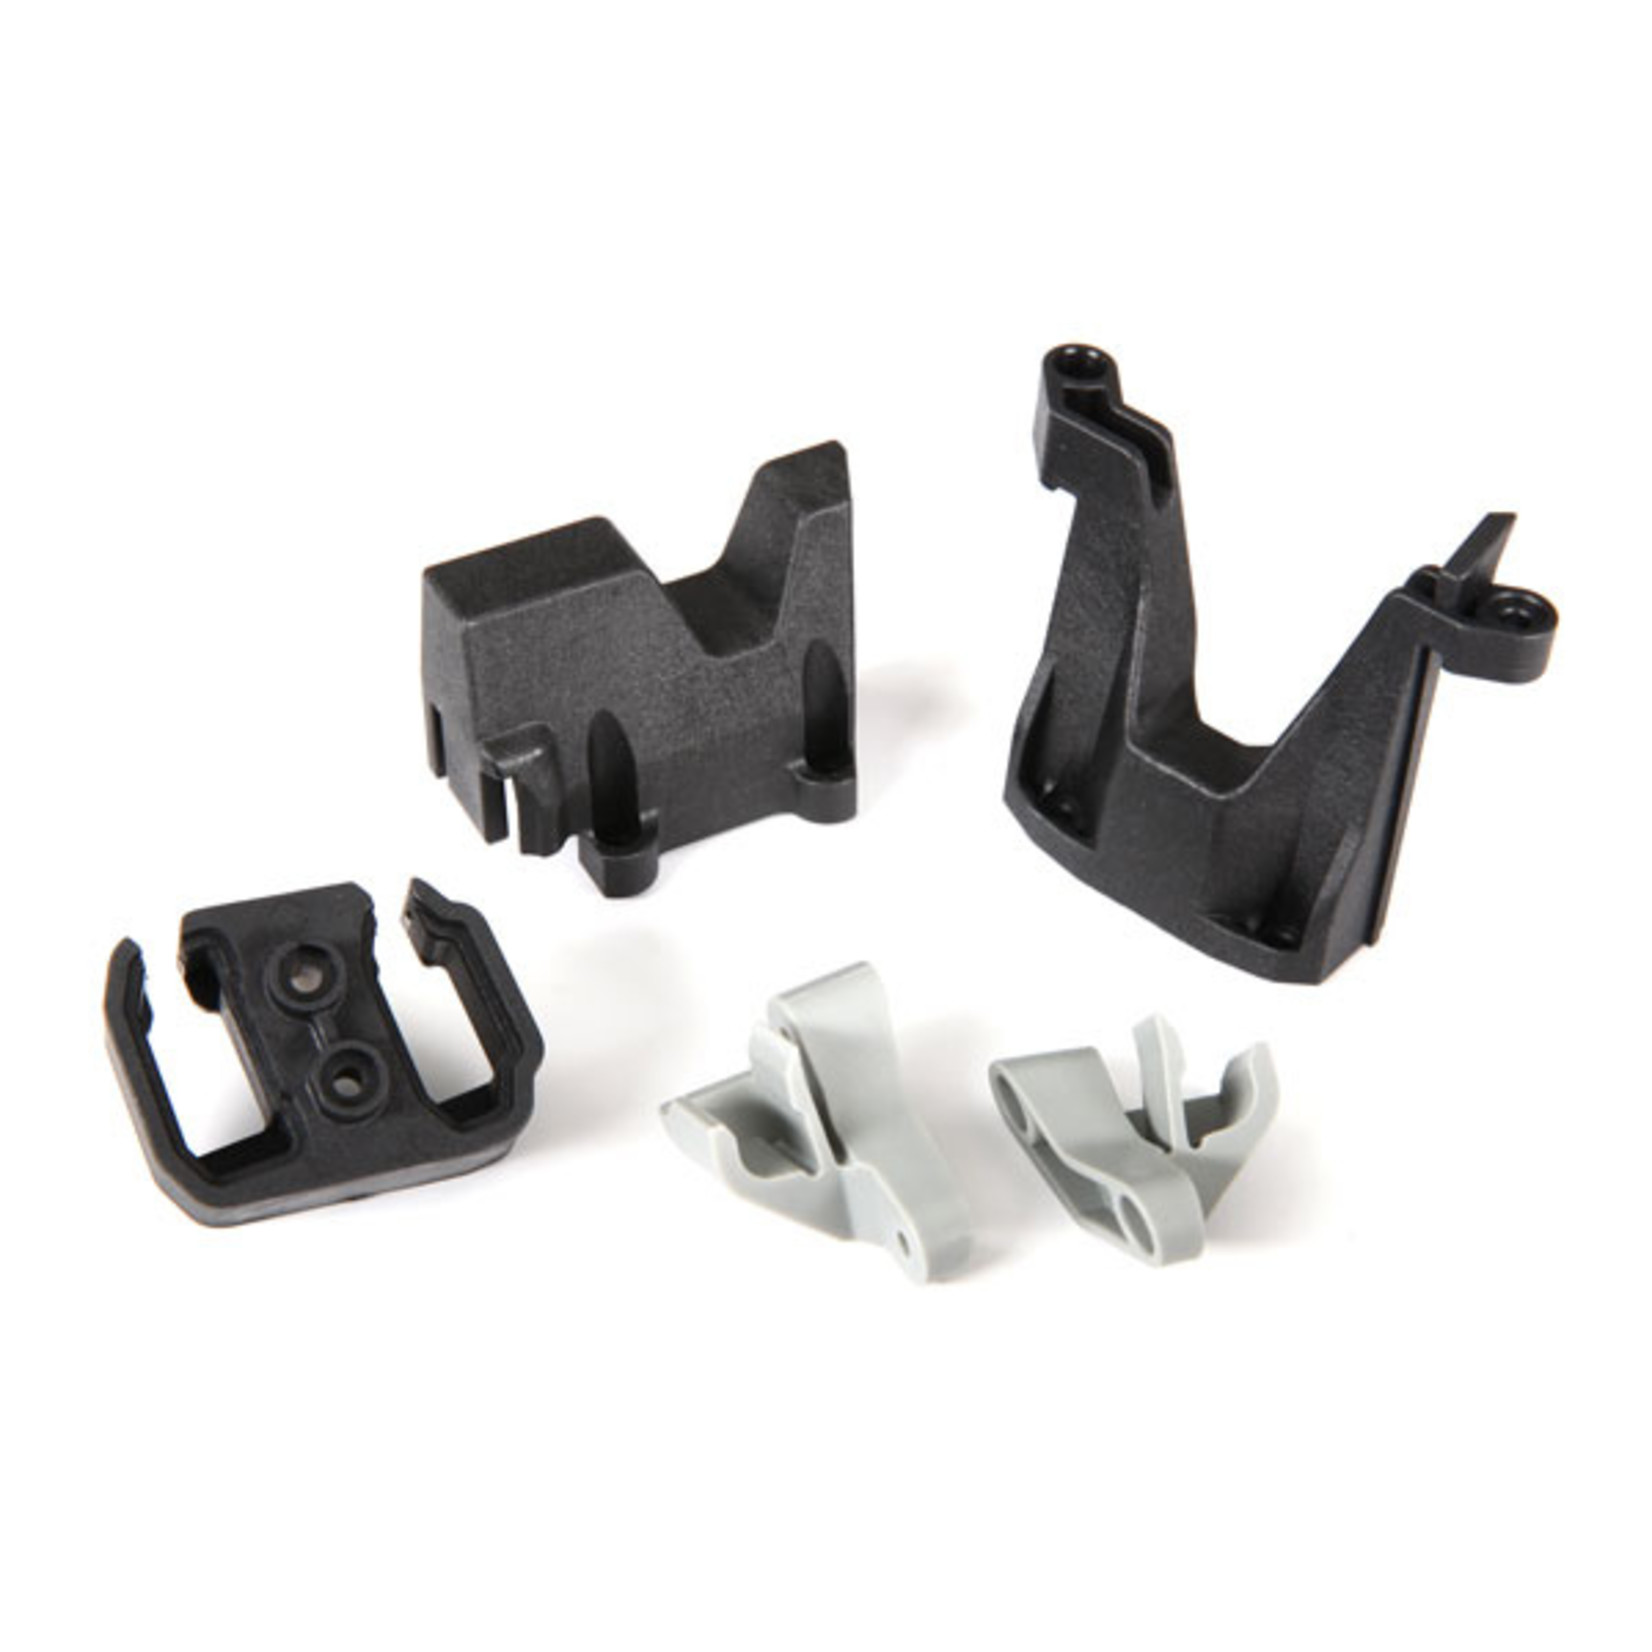 Traxxas 8525 - Battery connector retainer/ wall support/ front